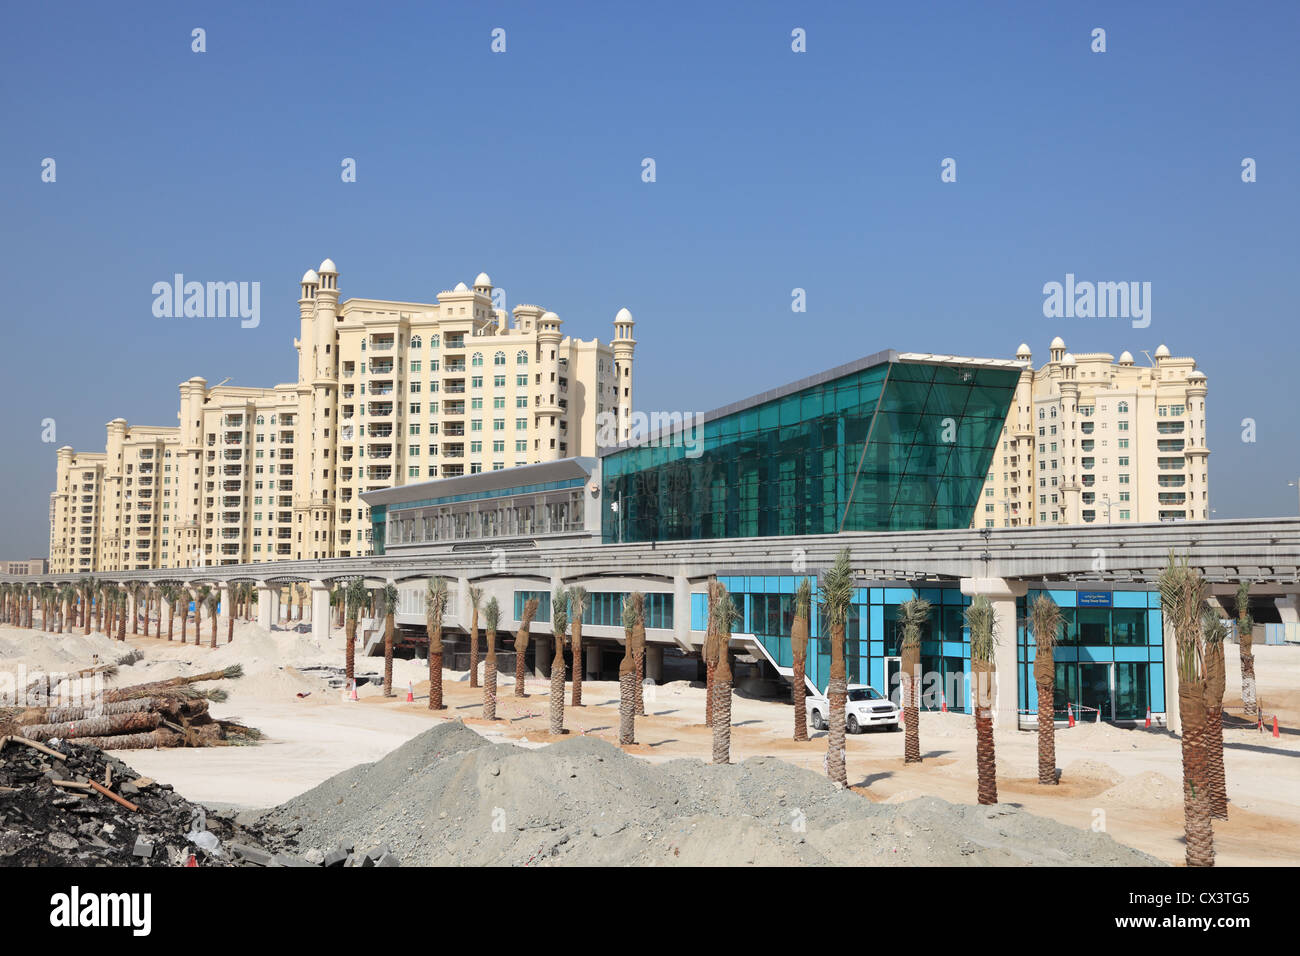 Trump Tower Station at The Palm Jumeirah in Dubai, United Arab Emirates Stock Photo